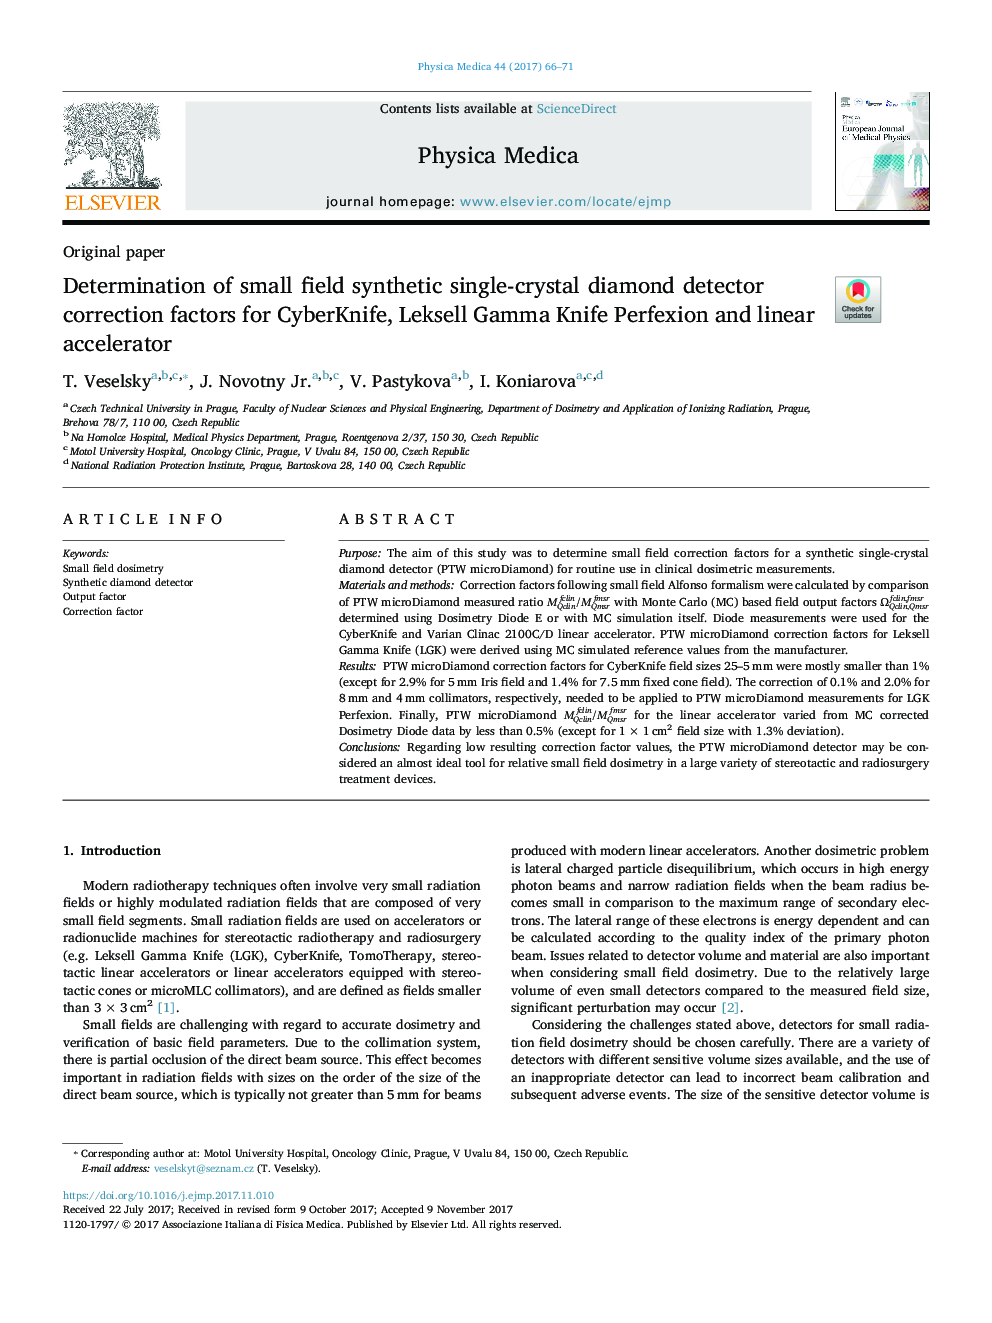 Determination of small field synthetic single-crystal diamond detector correction factors for CyberKnife, Leksell Gamma Knife Perfexion and linear accelerator